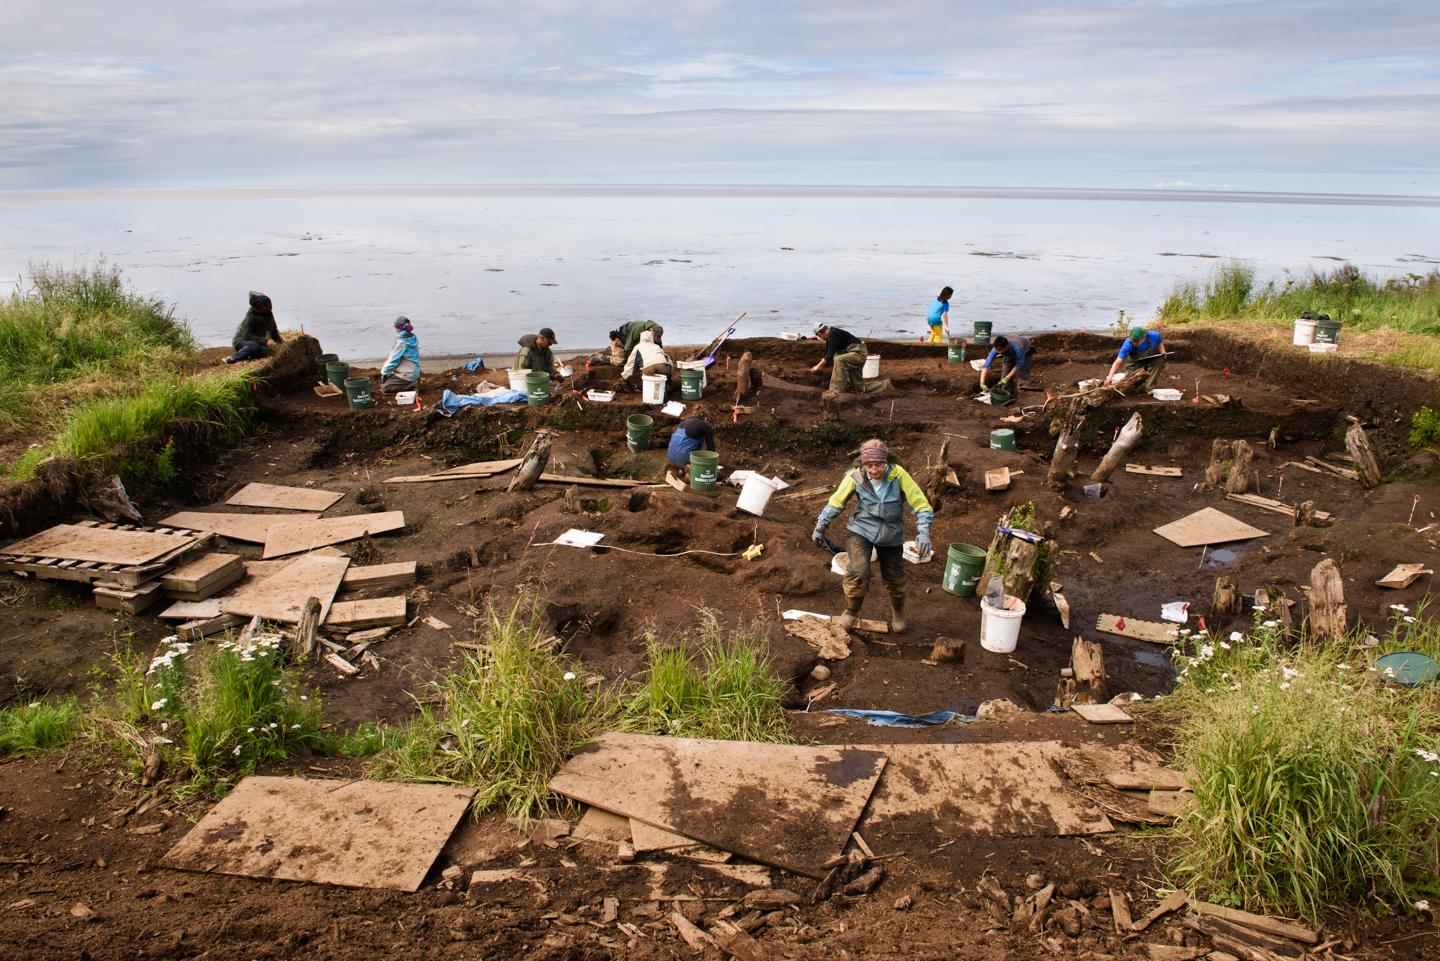 The Nunalleq dig site is located just off the beach on the Bering Sea Coast near Quinhagak. A...